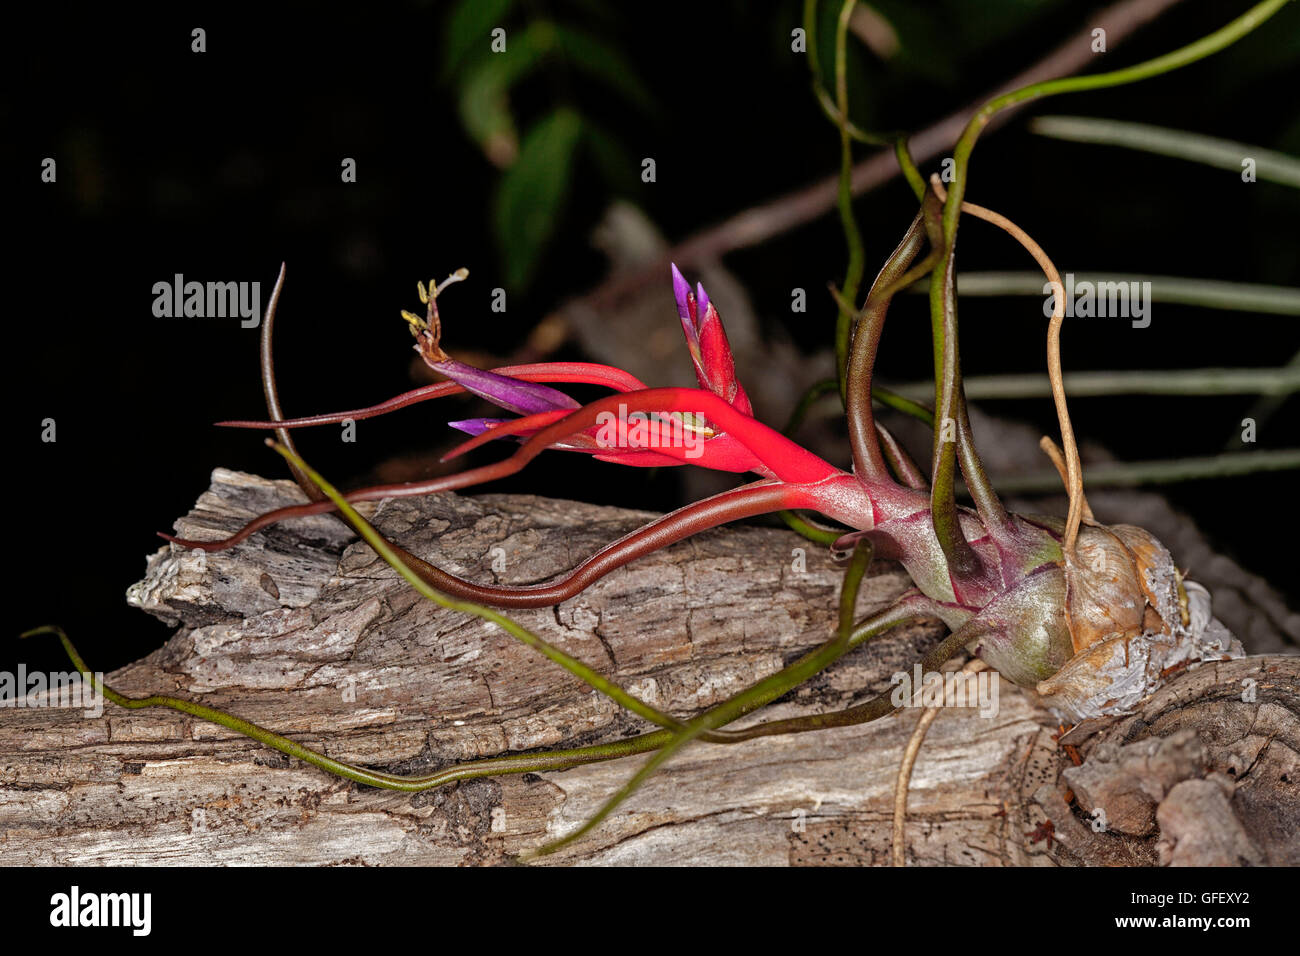 Bromeliad / air plant Tillandsia bulbosa with vivid red stems, green leaves and bright mauve flowers growing on a wooden stump Stock Photo